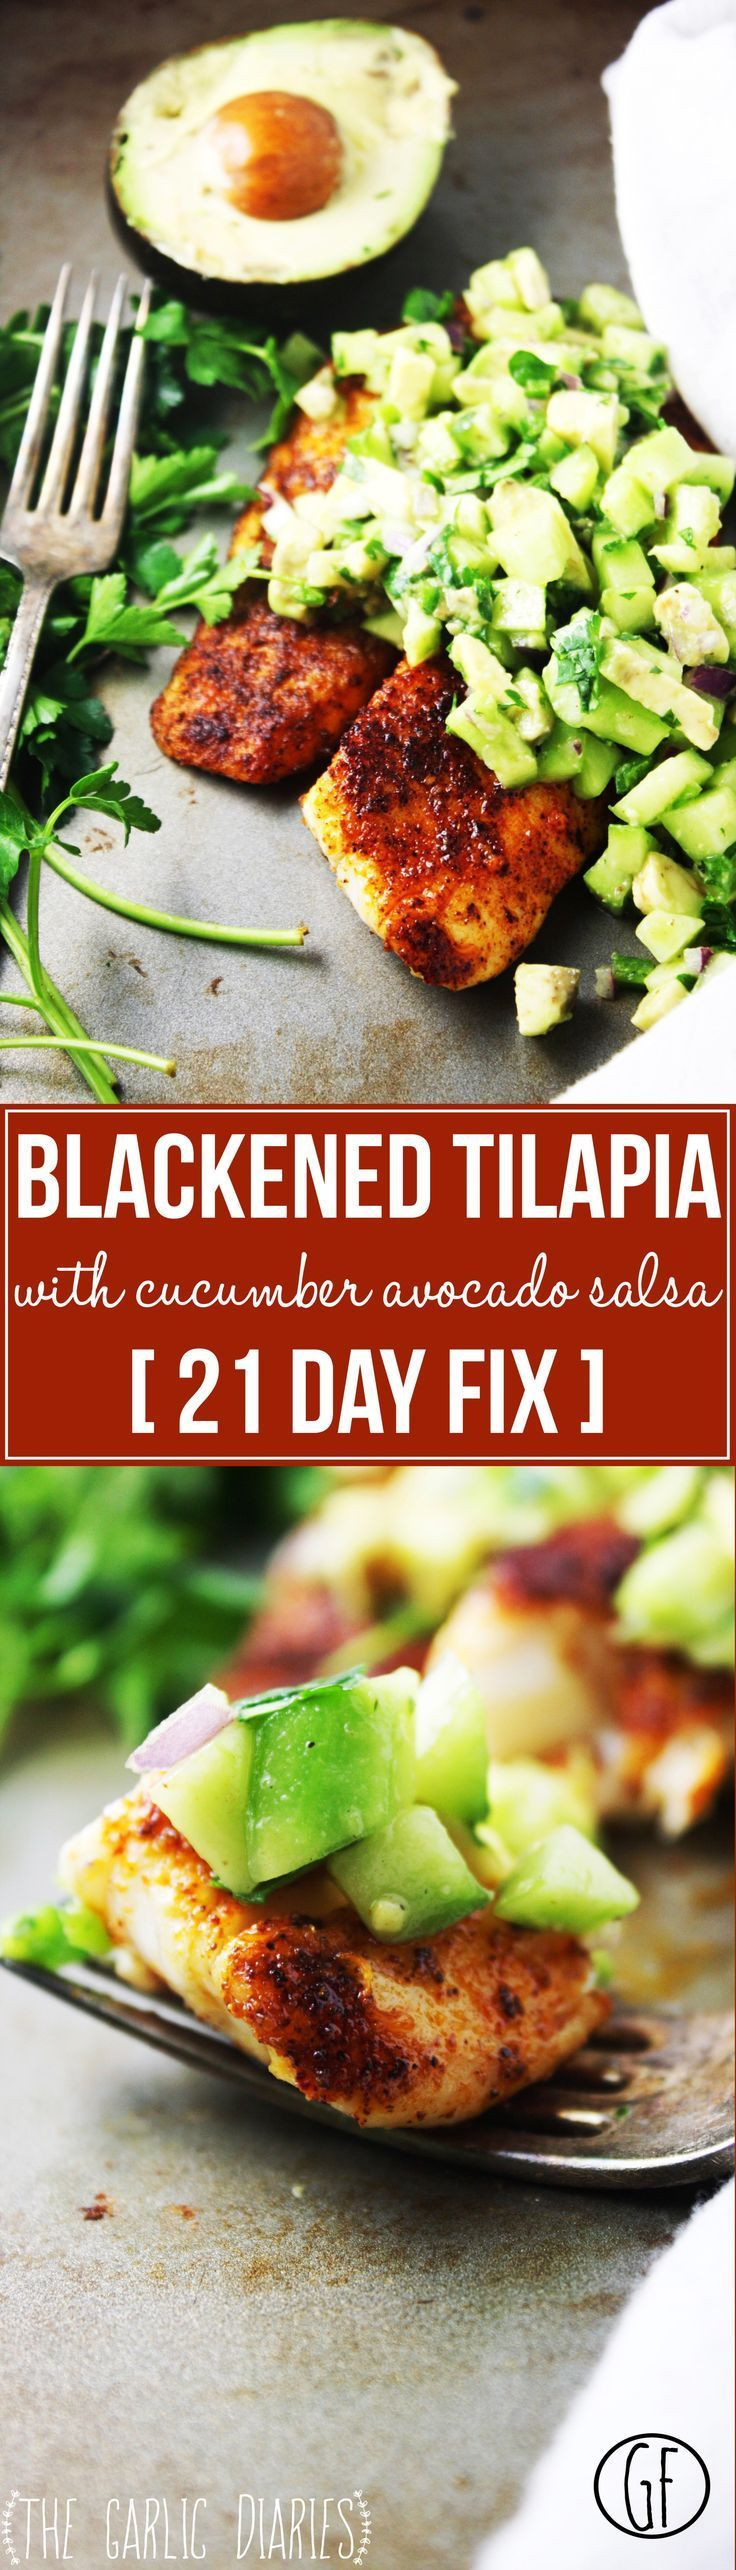 Healthy Tilapia Recipes For Weight Loss
 Blackened Tilapia with Cucumber Avocado Salsa [21 Day Fix